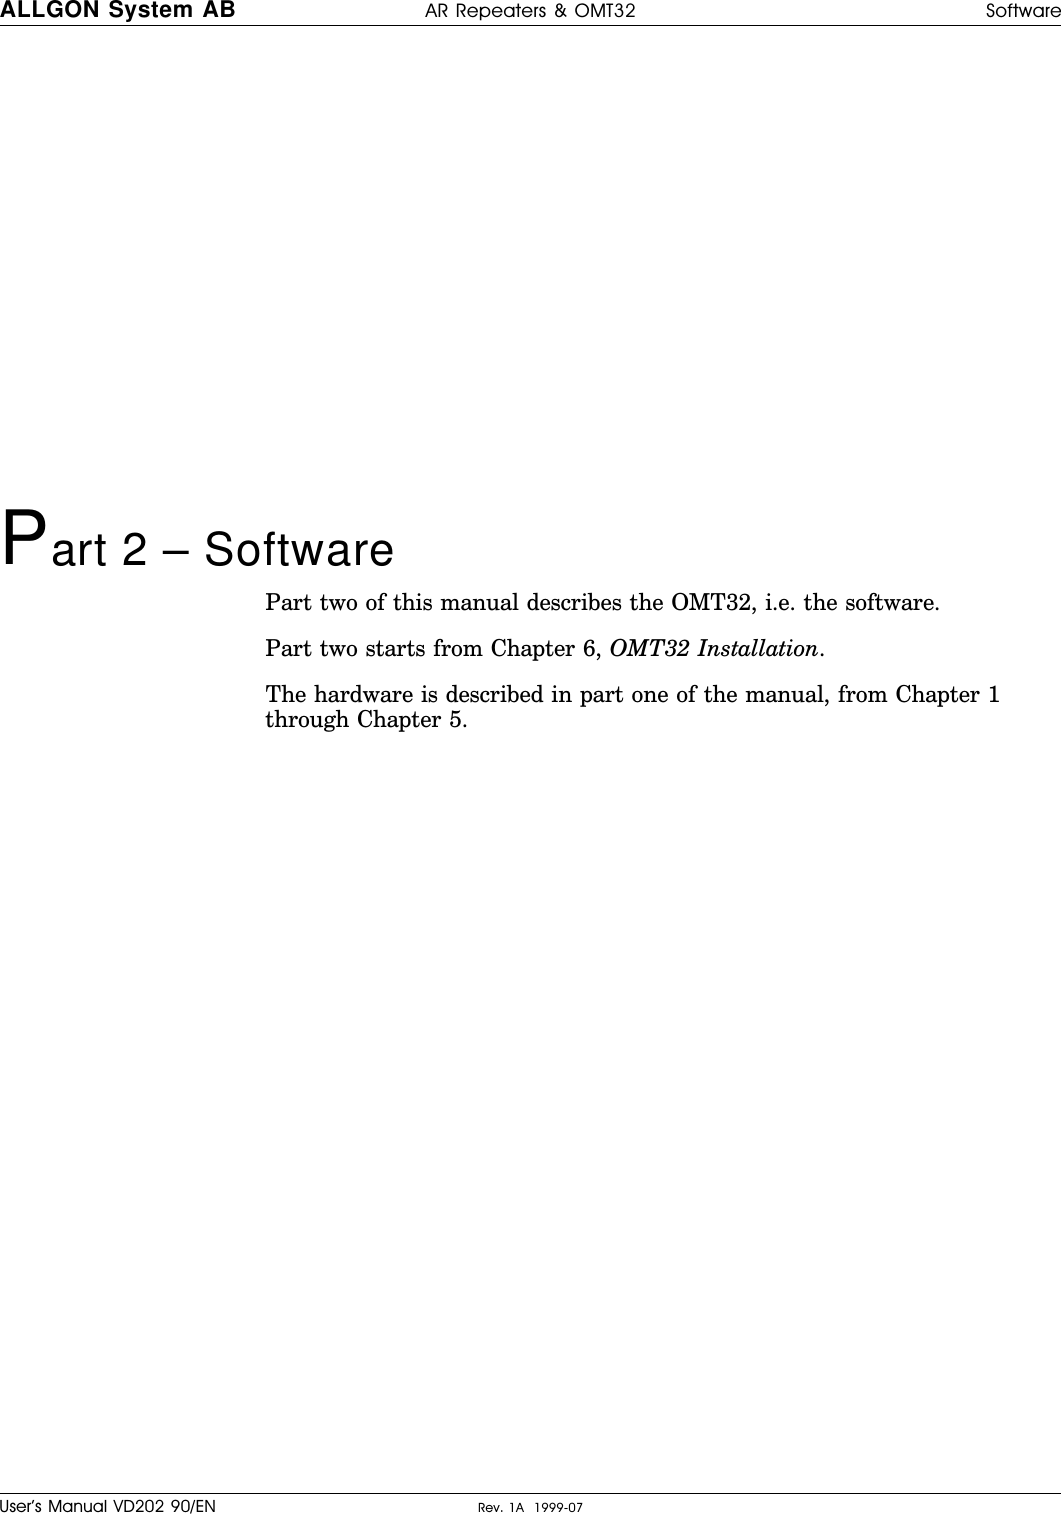 Part 2 – SoftwarePart two of this manual describes the OMT32, i.e. the software.Part two starts from Chapter 6, OMT32 Installation.The hardware is described in part one of the manual, from Chapter 1through Chapter 5.ALLGON System AB AR Repeaters &amp; OMT32 SoftwareUser’s Manual VD202 90/EN Rev. 1A  1999-07